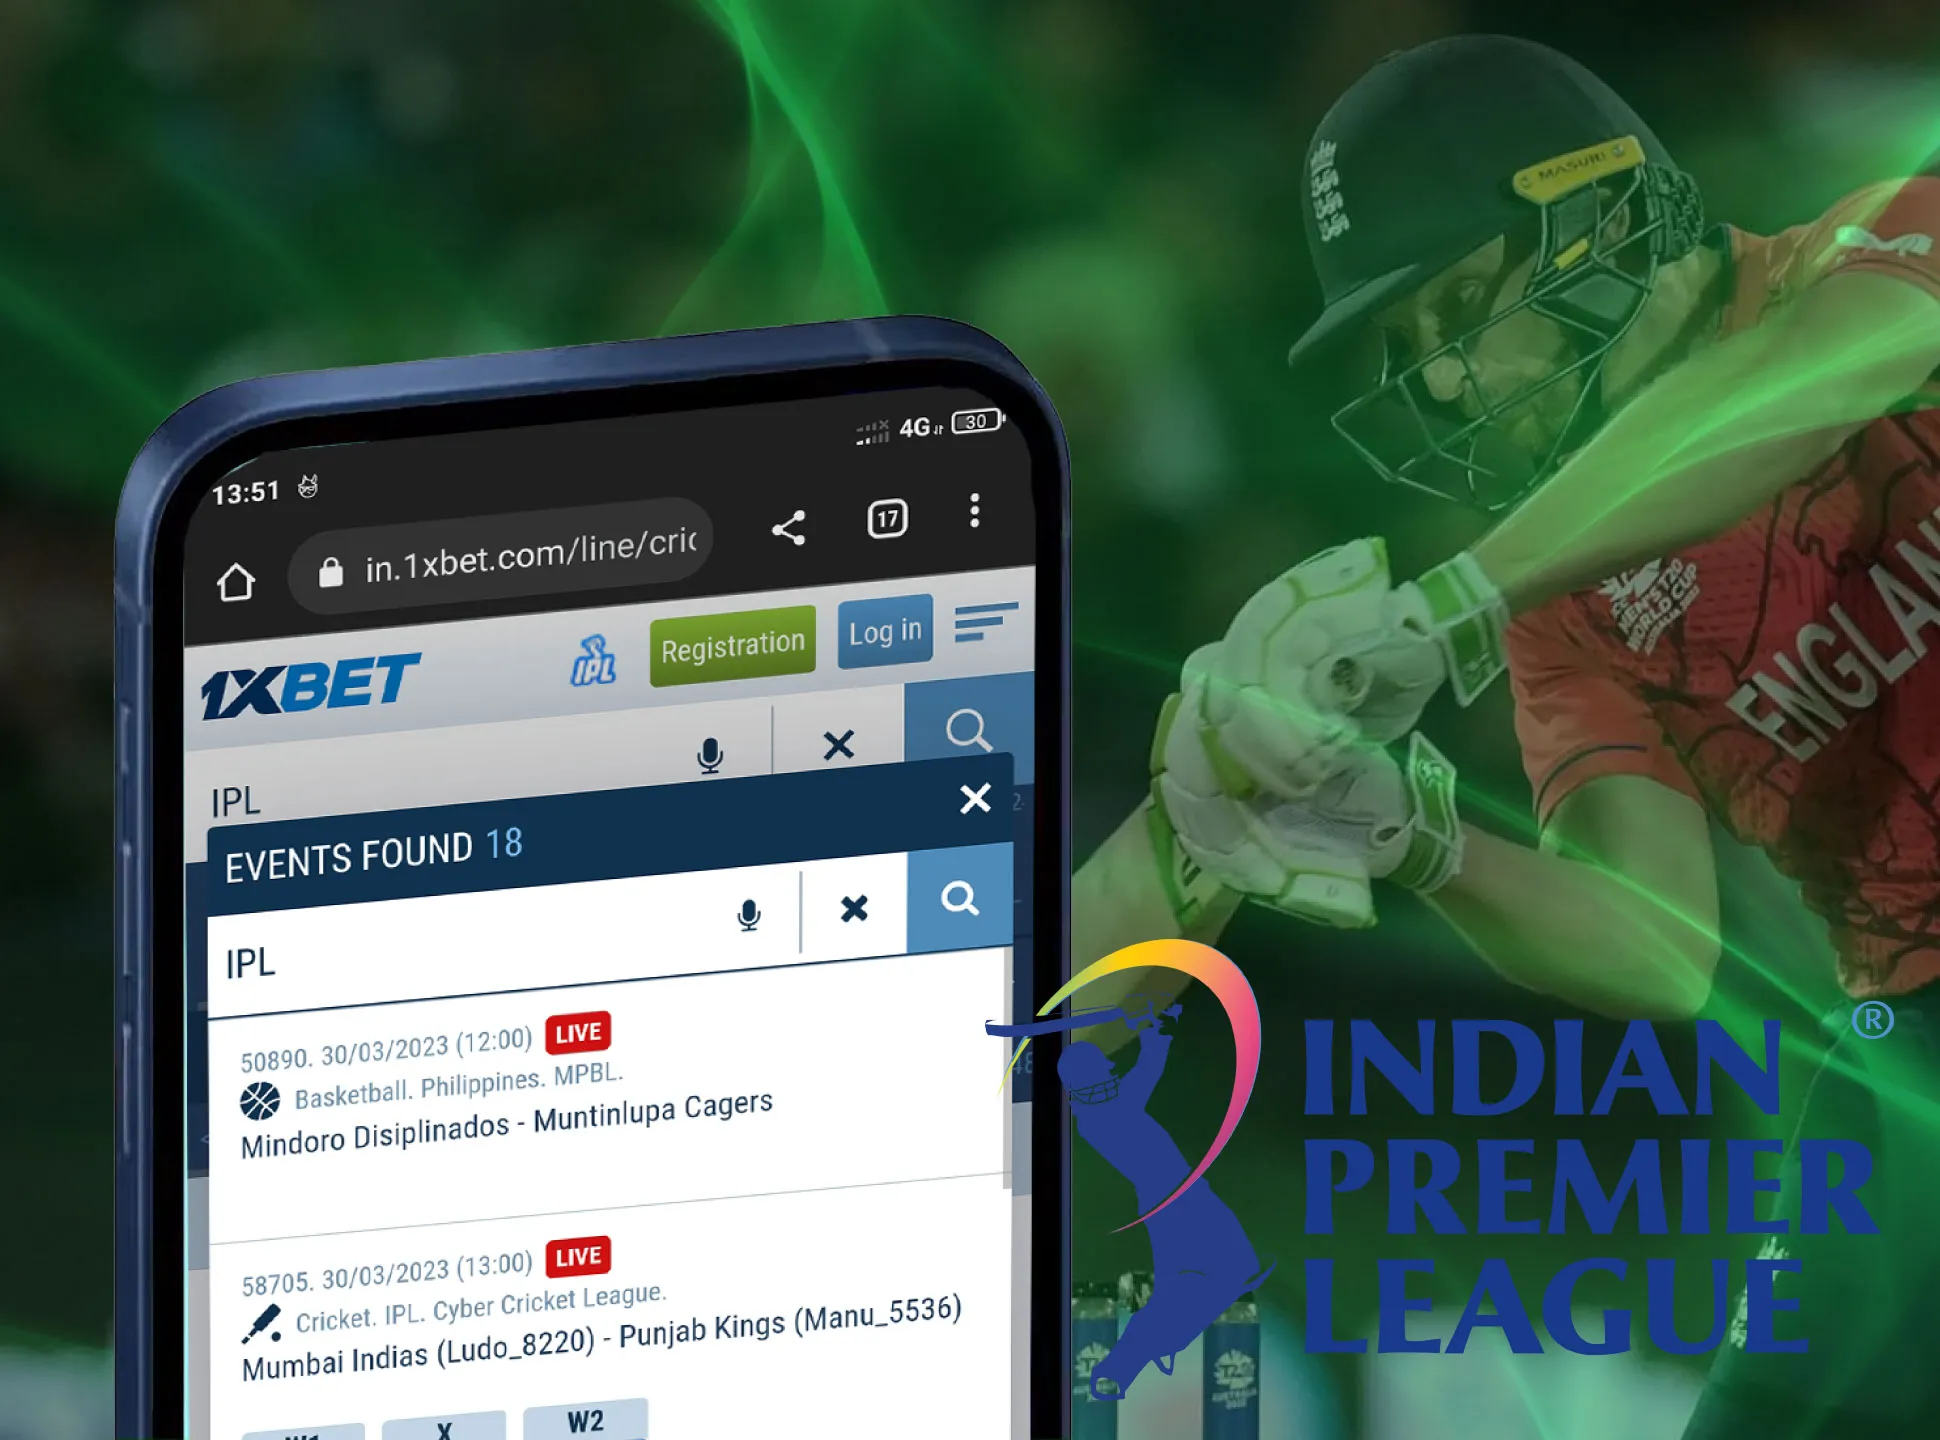 1xBet has a great mobile app so you can bet on the IPL matches right on your smartphone.